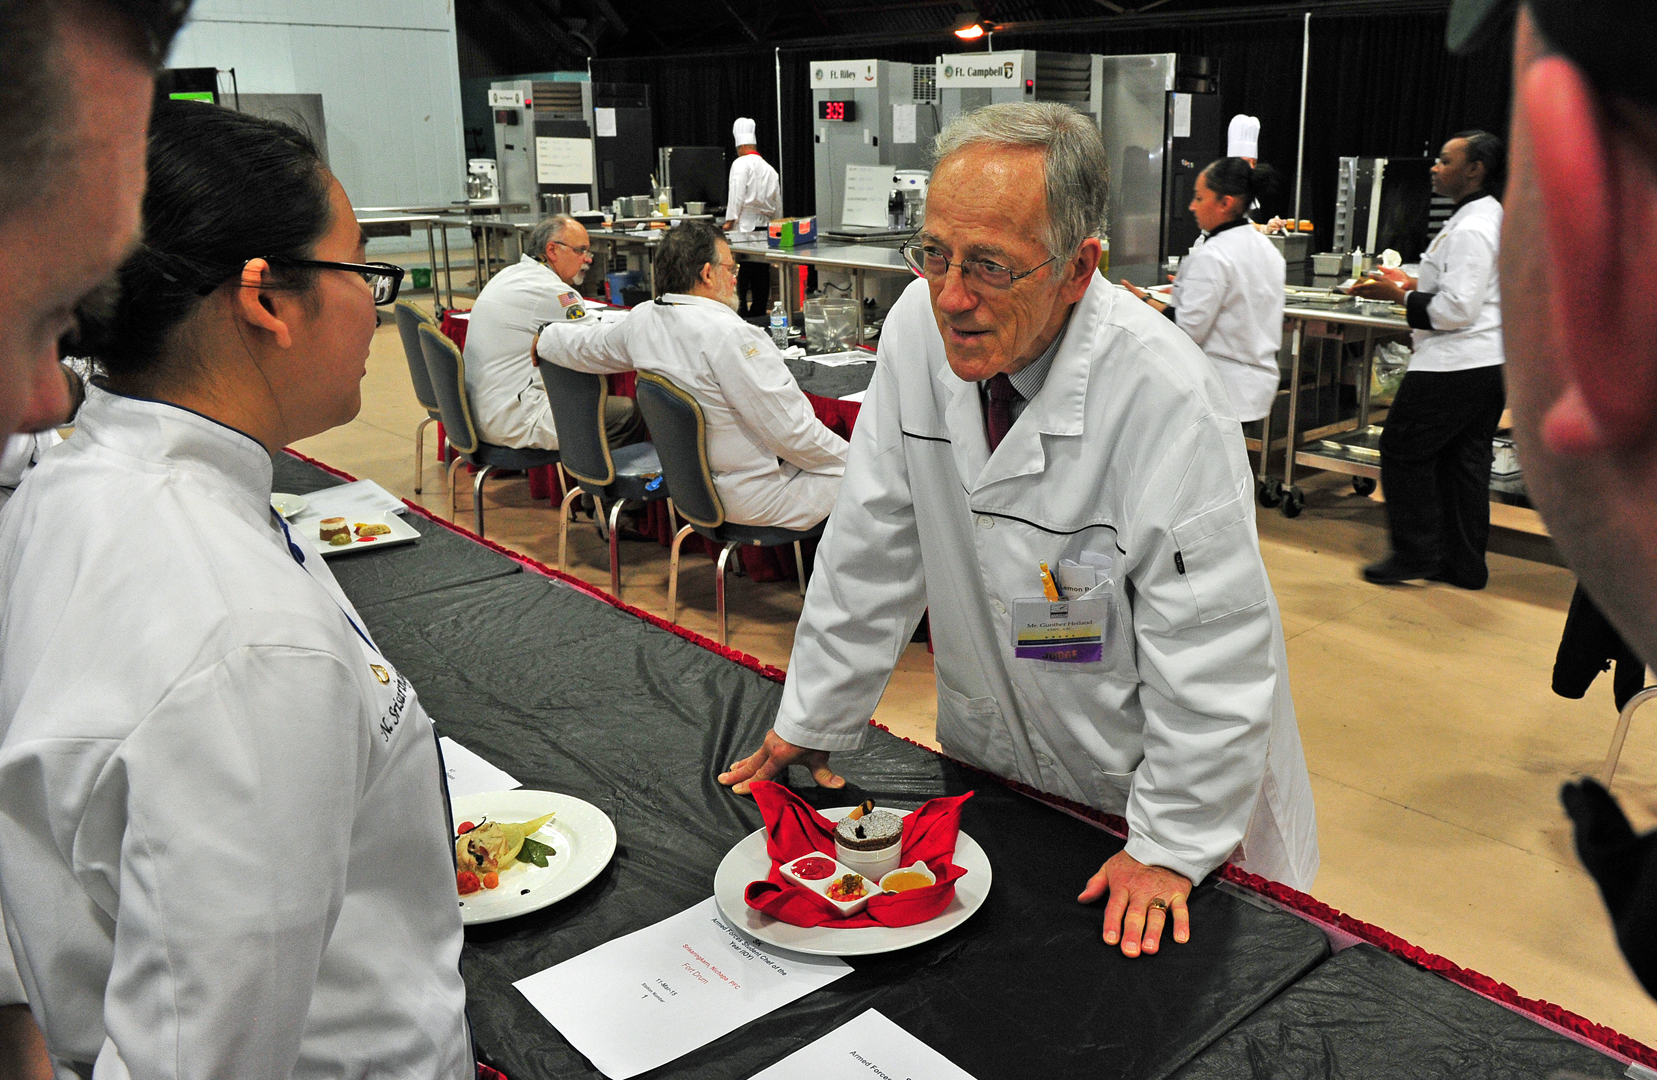 Pfc. Nichapa Srisaringkam is critiqued by American Culinary Federation judge Gunther Heiland as teammates look on. (U.S. Army photo by J.D. Leipold)